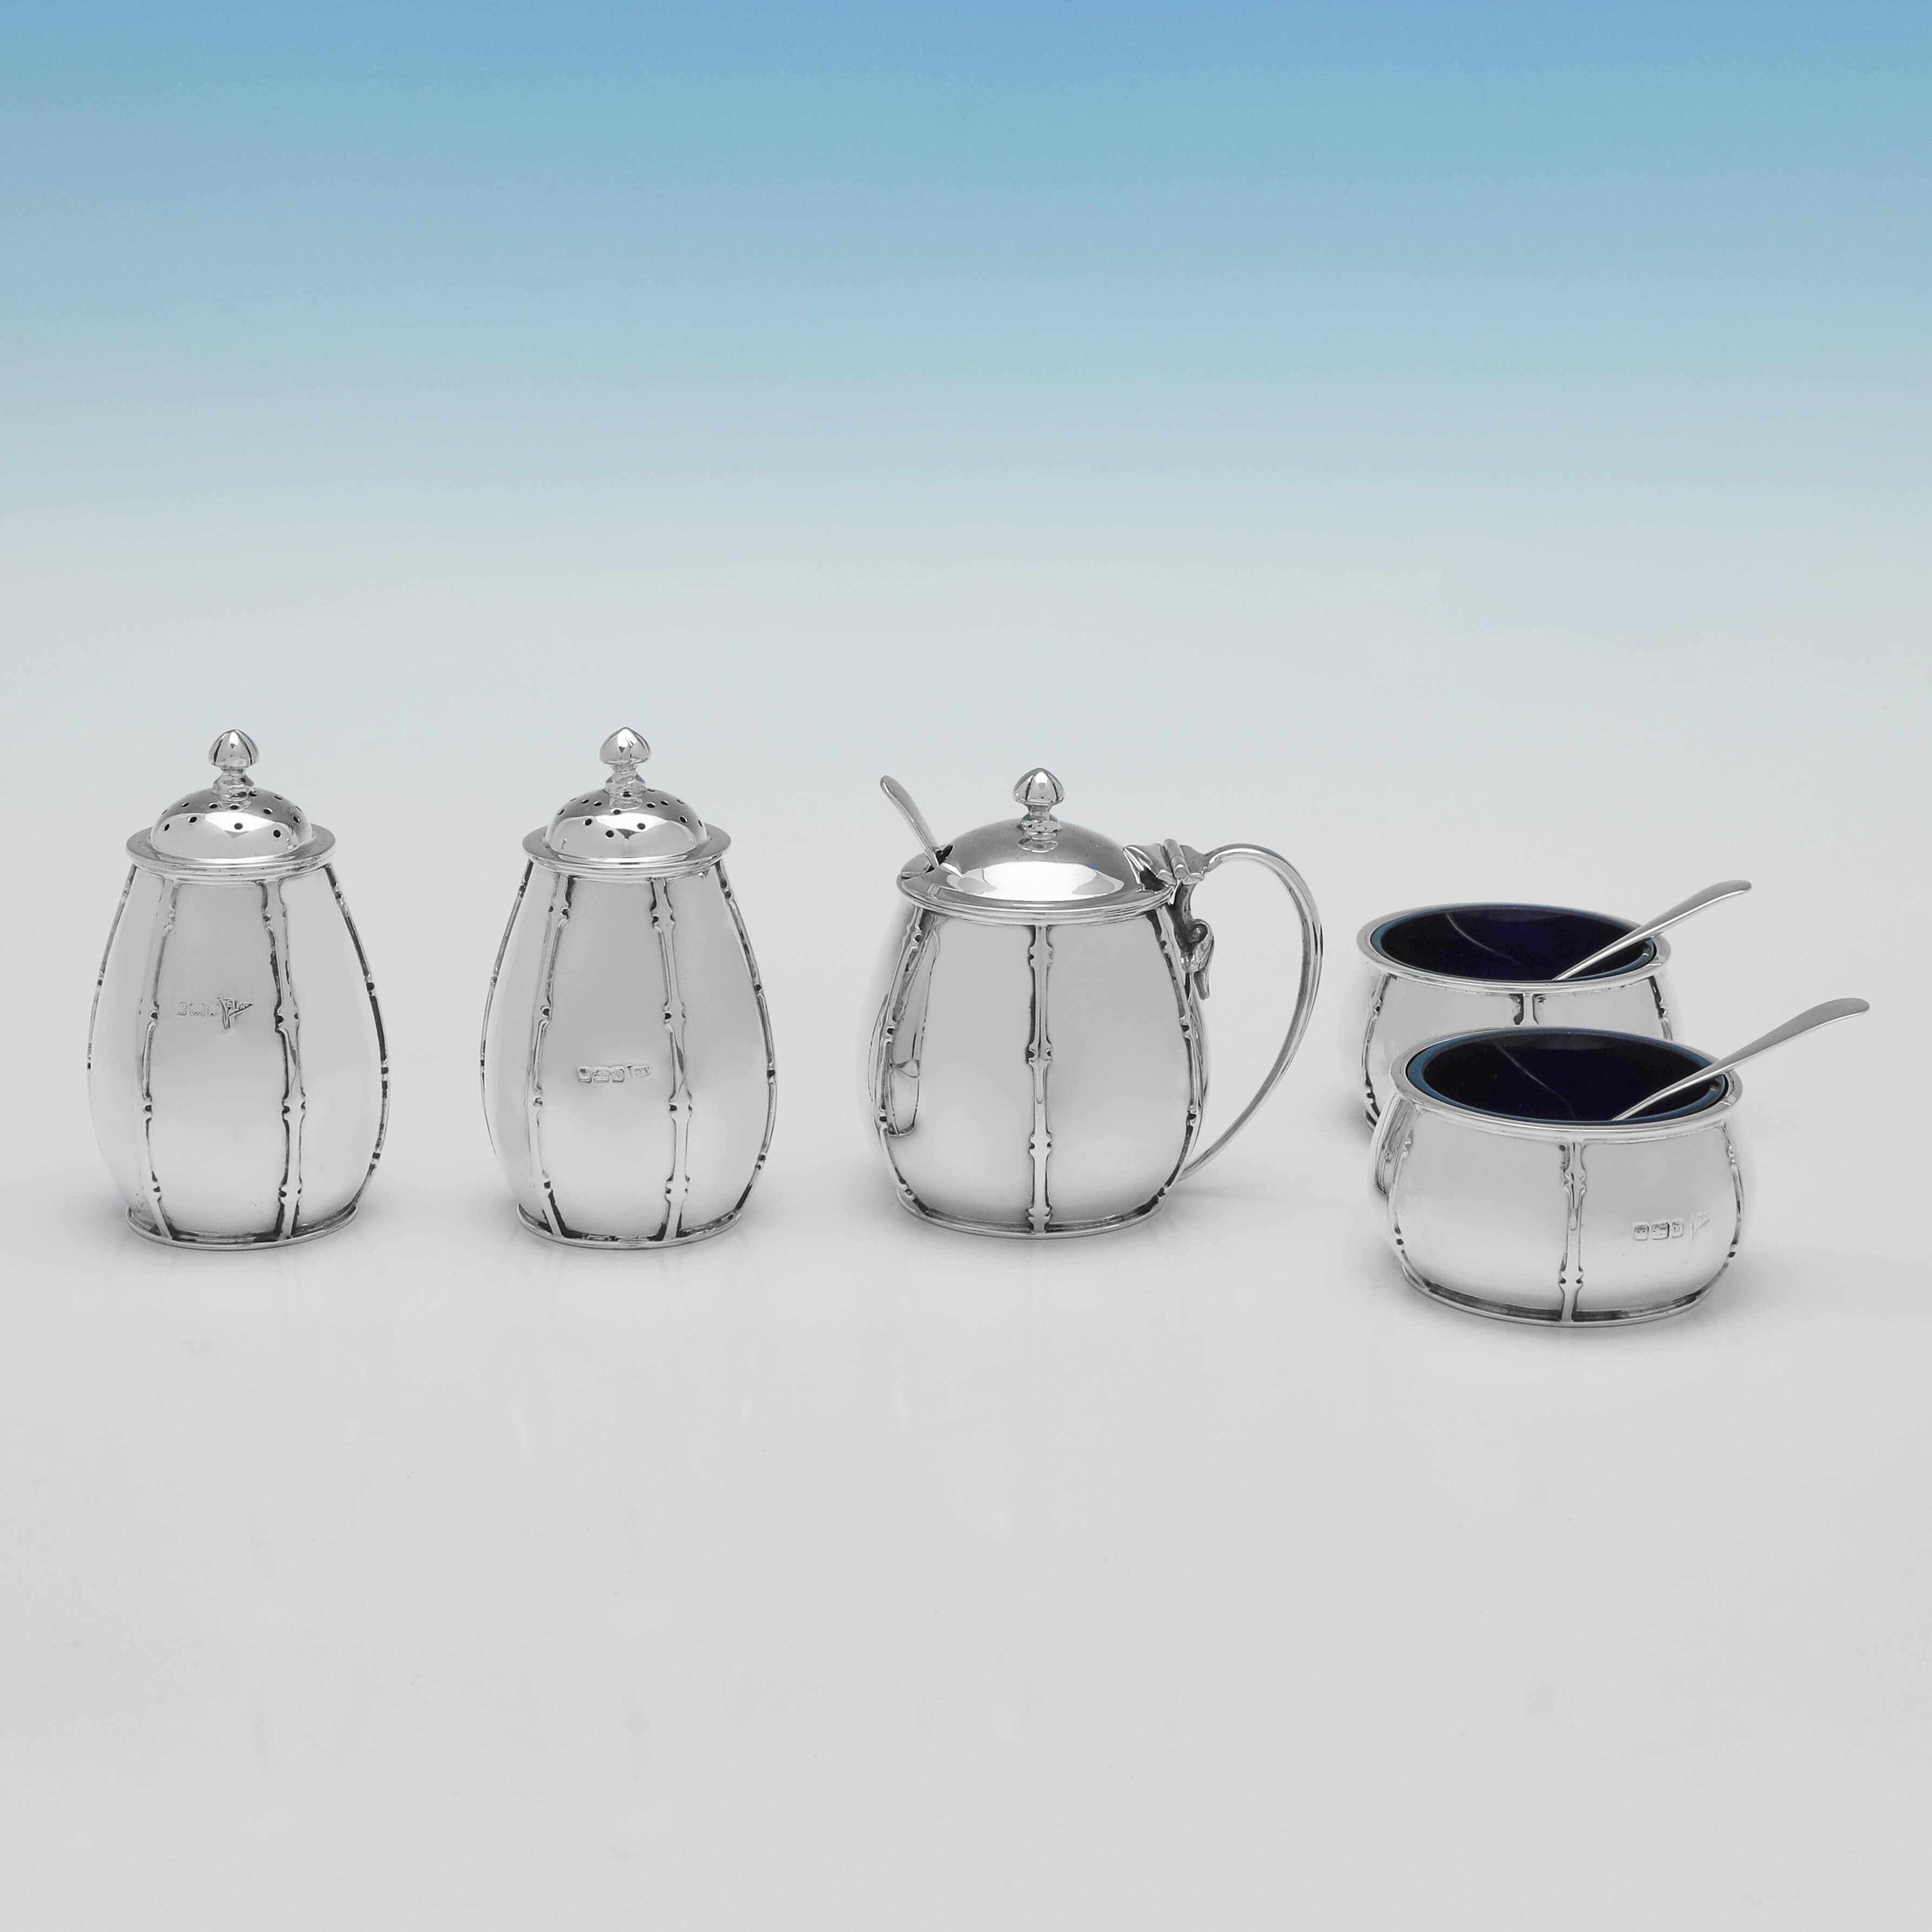 Hallmarked in Sheffield in 1913 by Walker & Hall, this stylish, 5 piece, Antique, Sterling Silver Condiment Set, is presented in its original box, and is in the Arts & Crafts taste. 

Each pepper pot measures 3.25